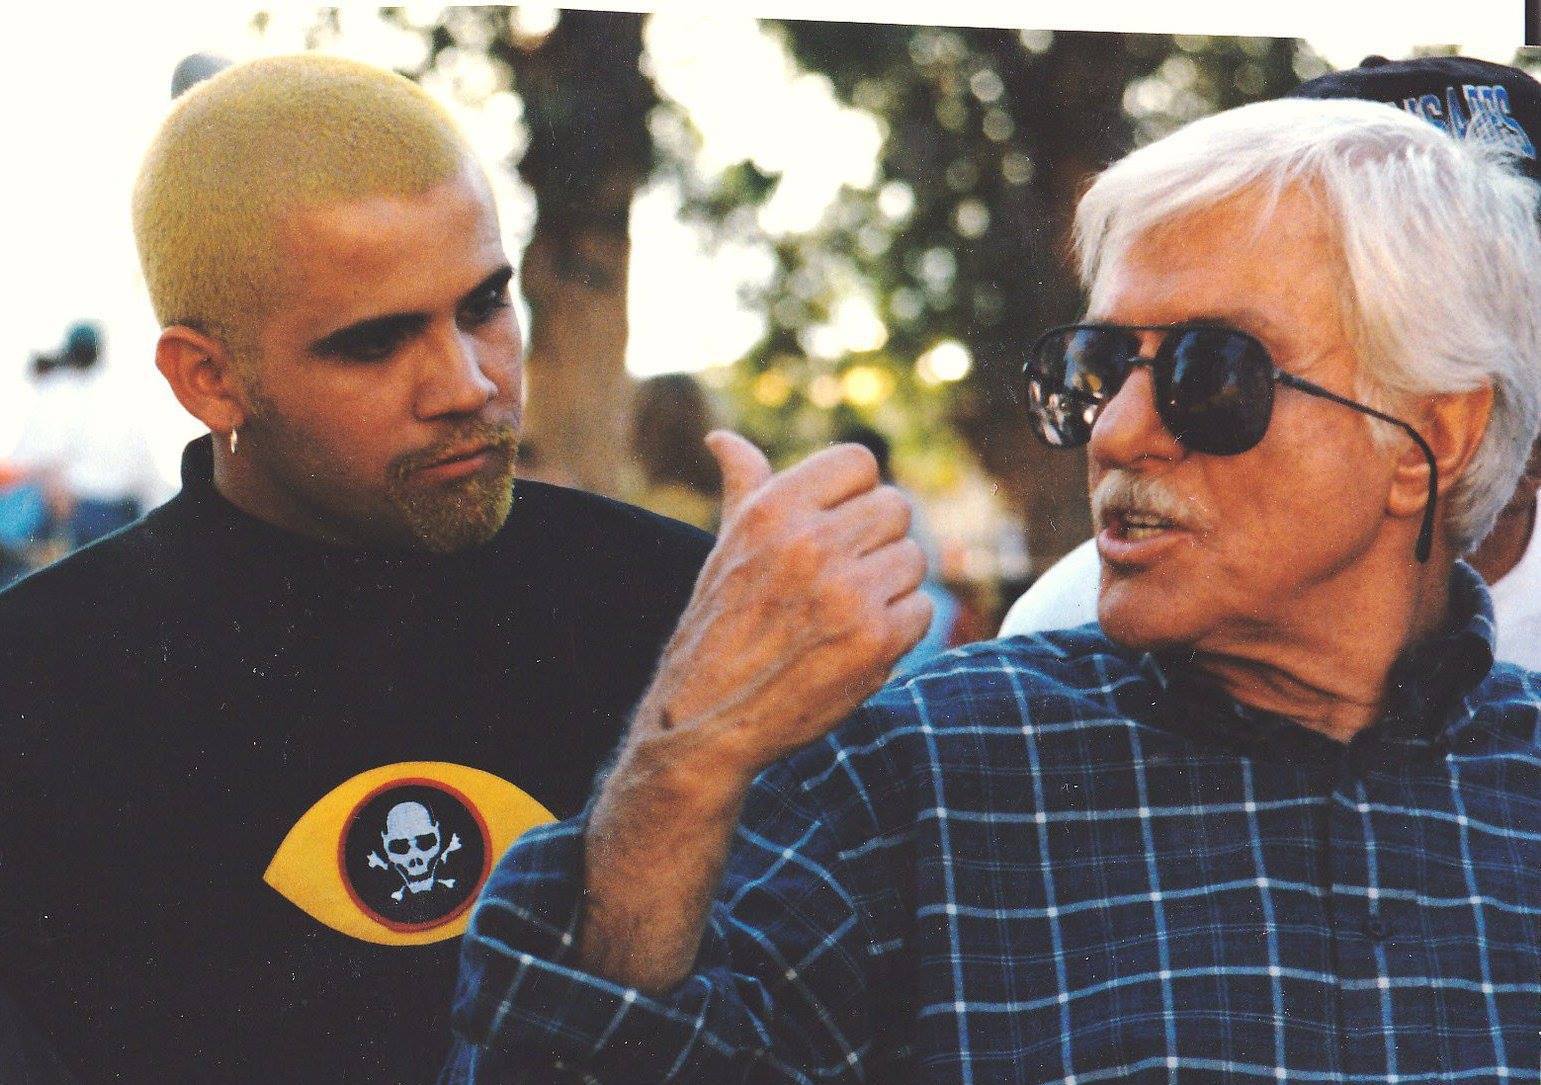 Me and Dick Van Dyke working a scene. comedy is serious business...